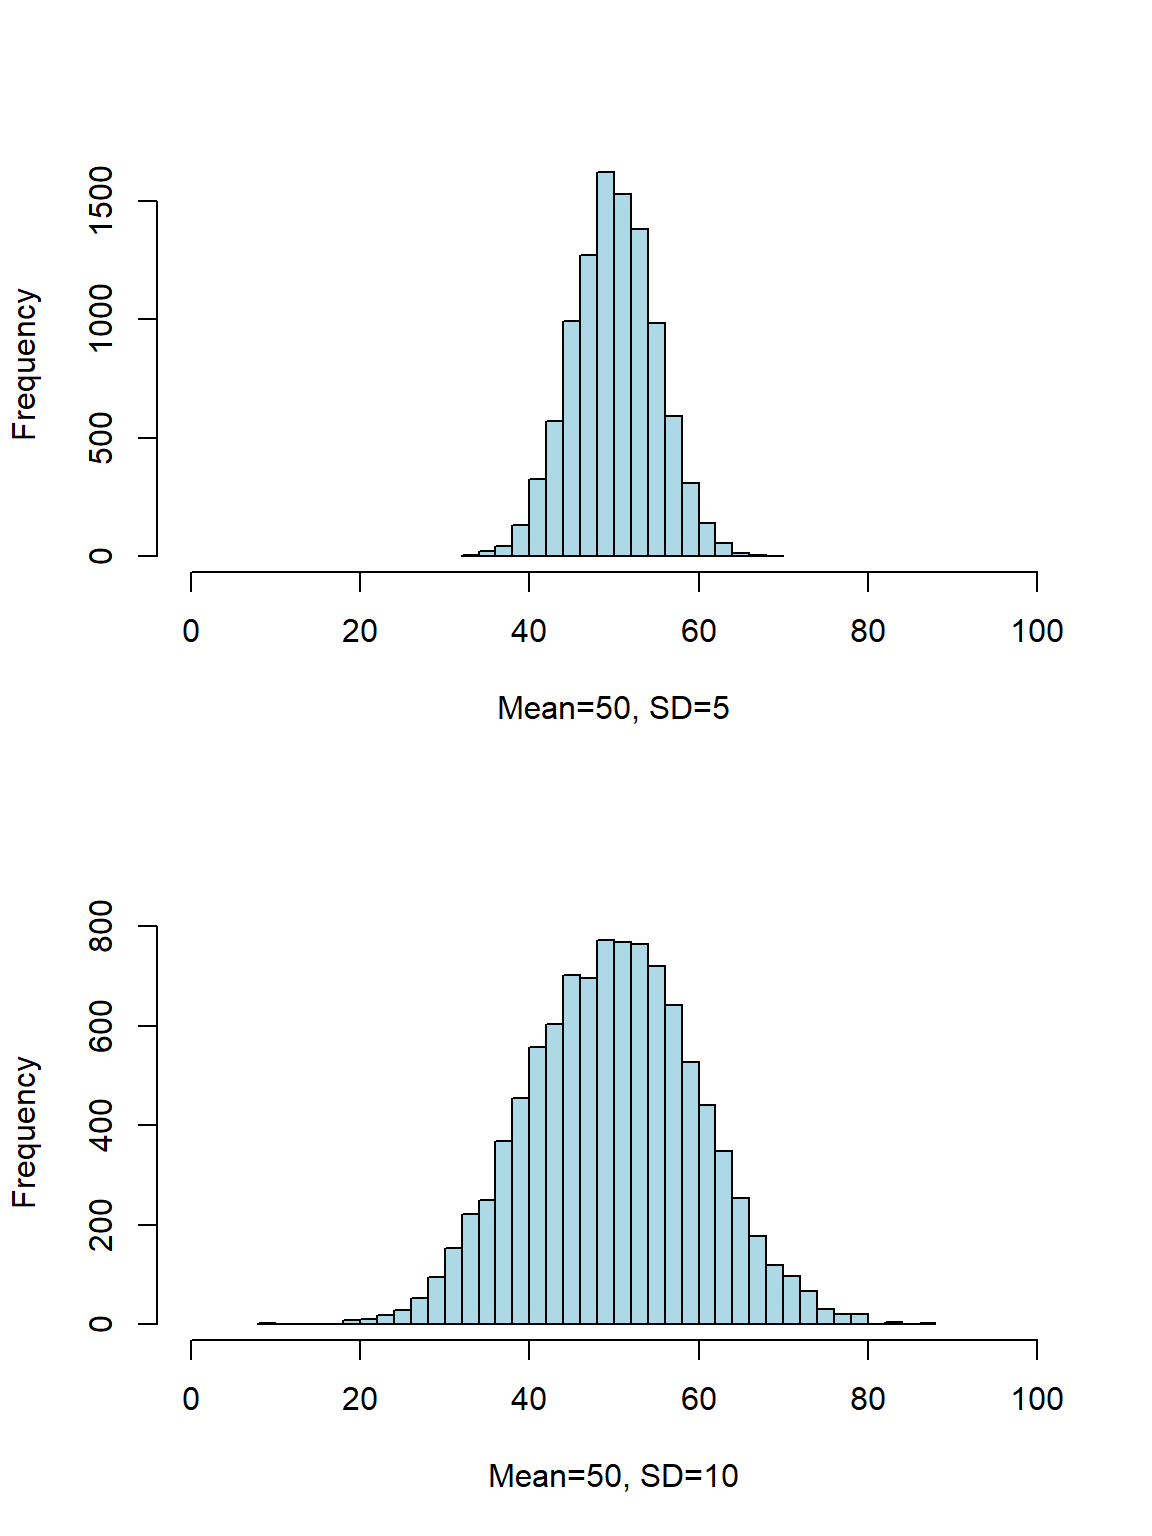 Distributions with similar central location but different dispersion